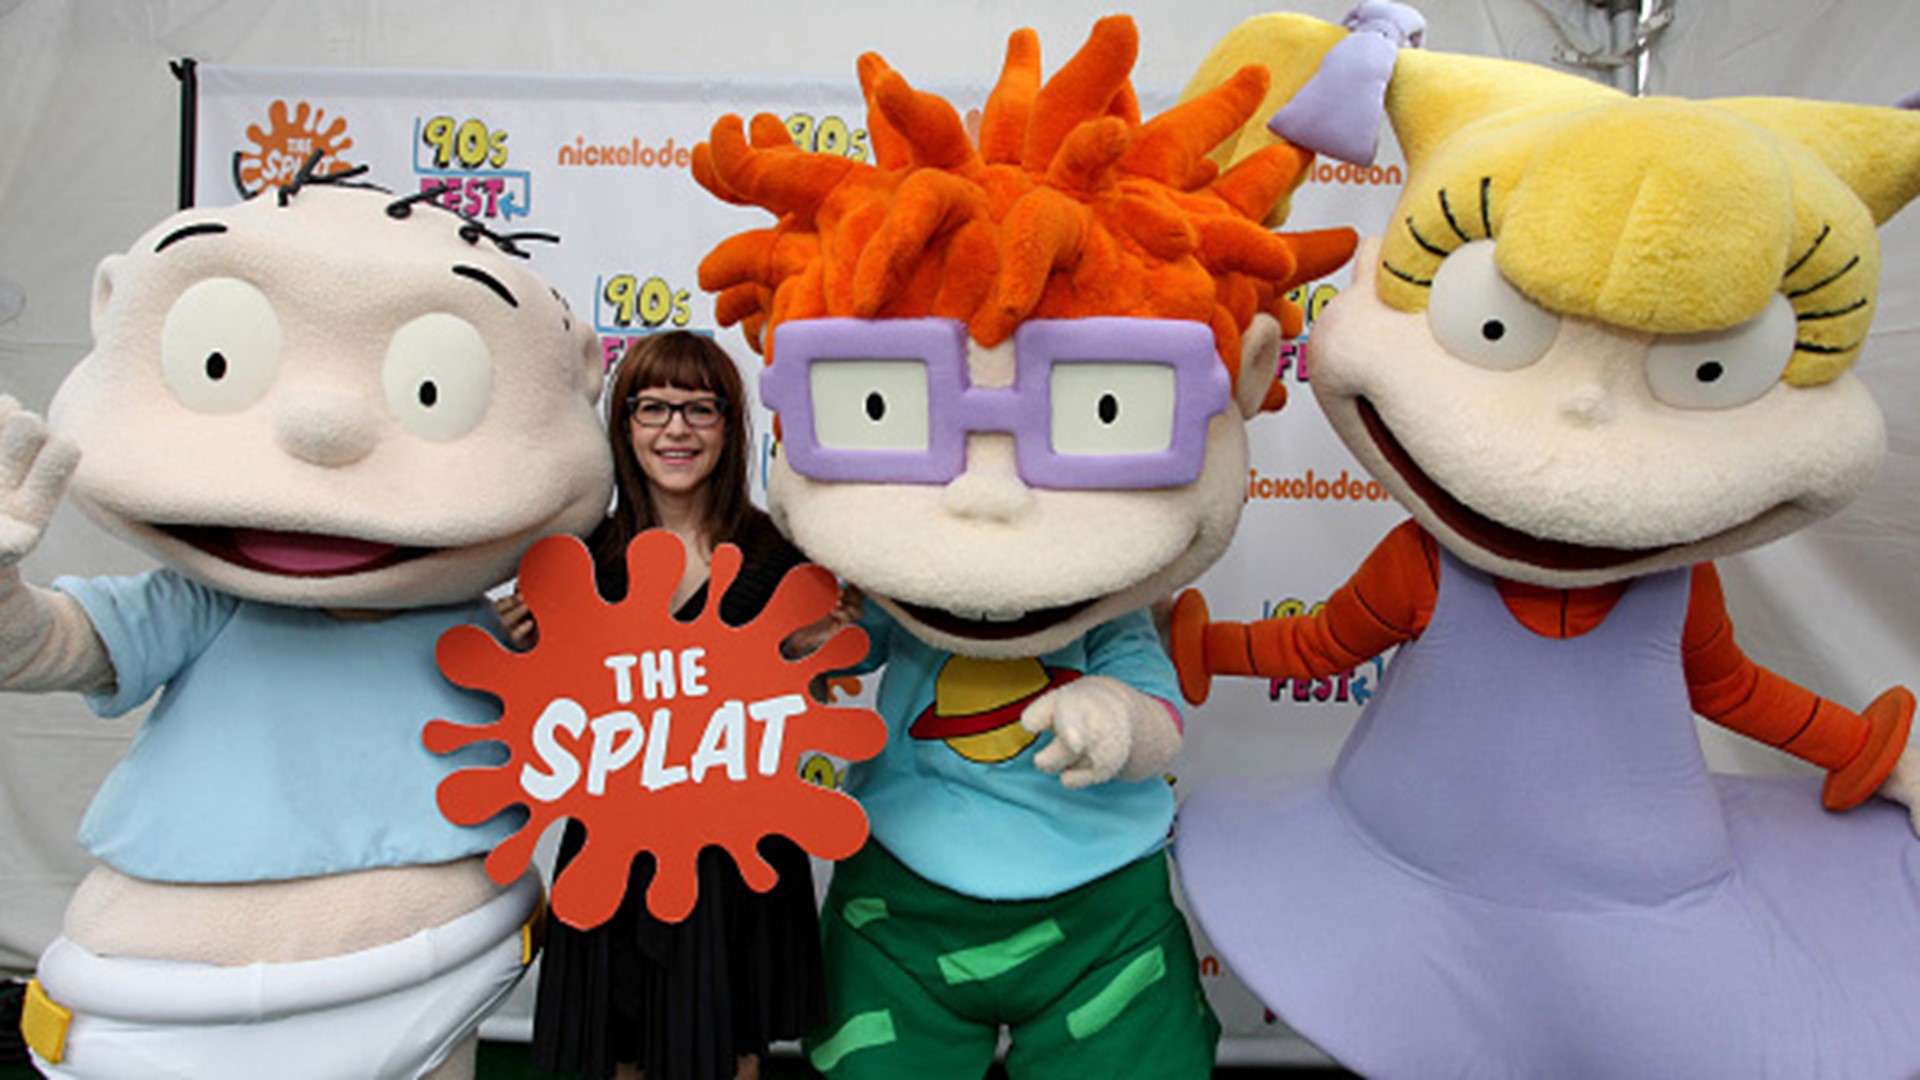 Rugrats Return Beloved Nickelodeon Show To Get New Episodes And A Movie Cbs19tv 